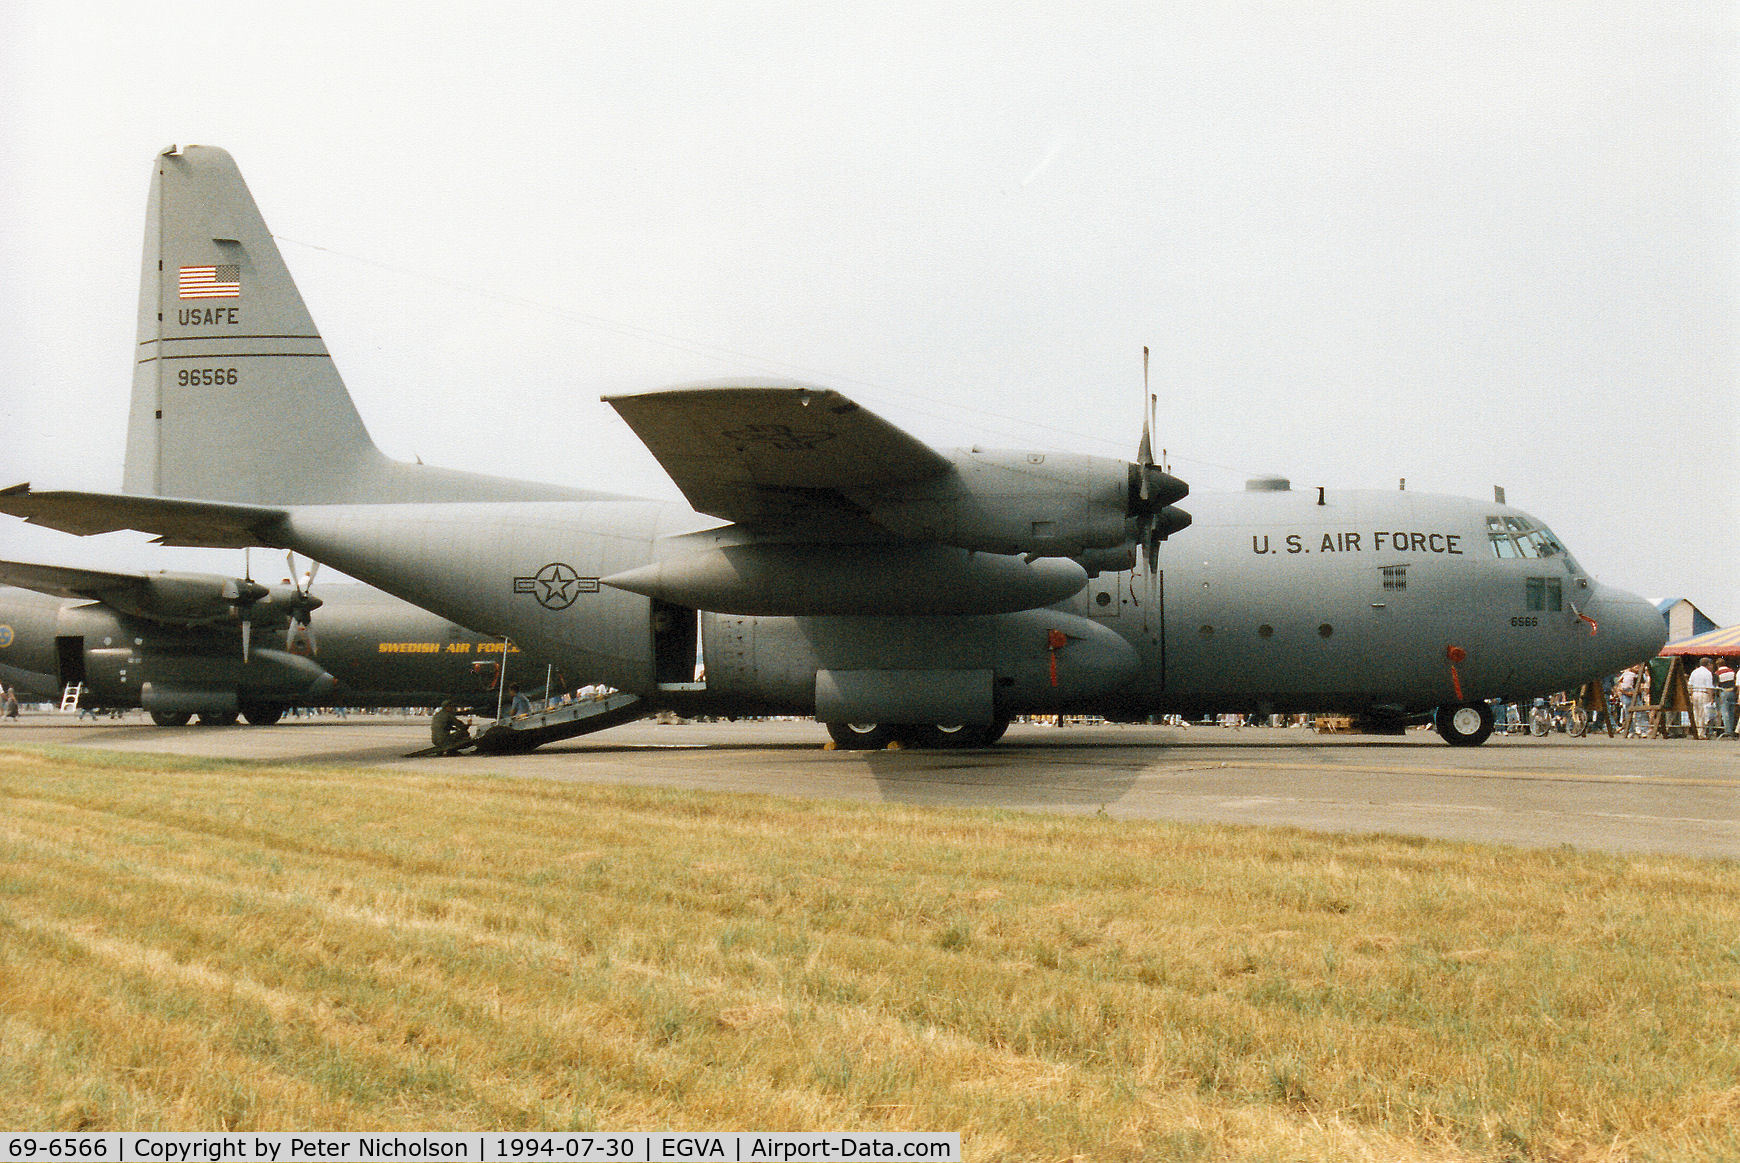 69-6566, 1969 Lockheed C-130E Hercules C/N 382-4340, C-130E Hercules, callsign Herky 007, named Boss Hog of the 435th Airlift Wing on display at the 1994 Intnl Air Tattoo at RAF Fairford.